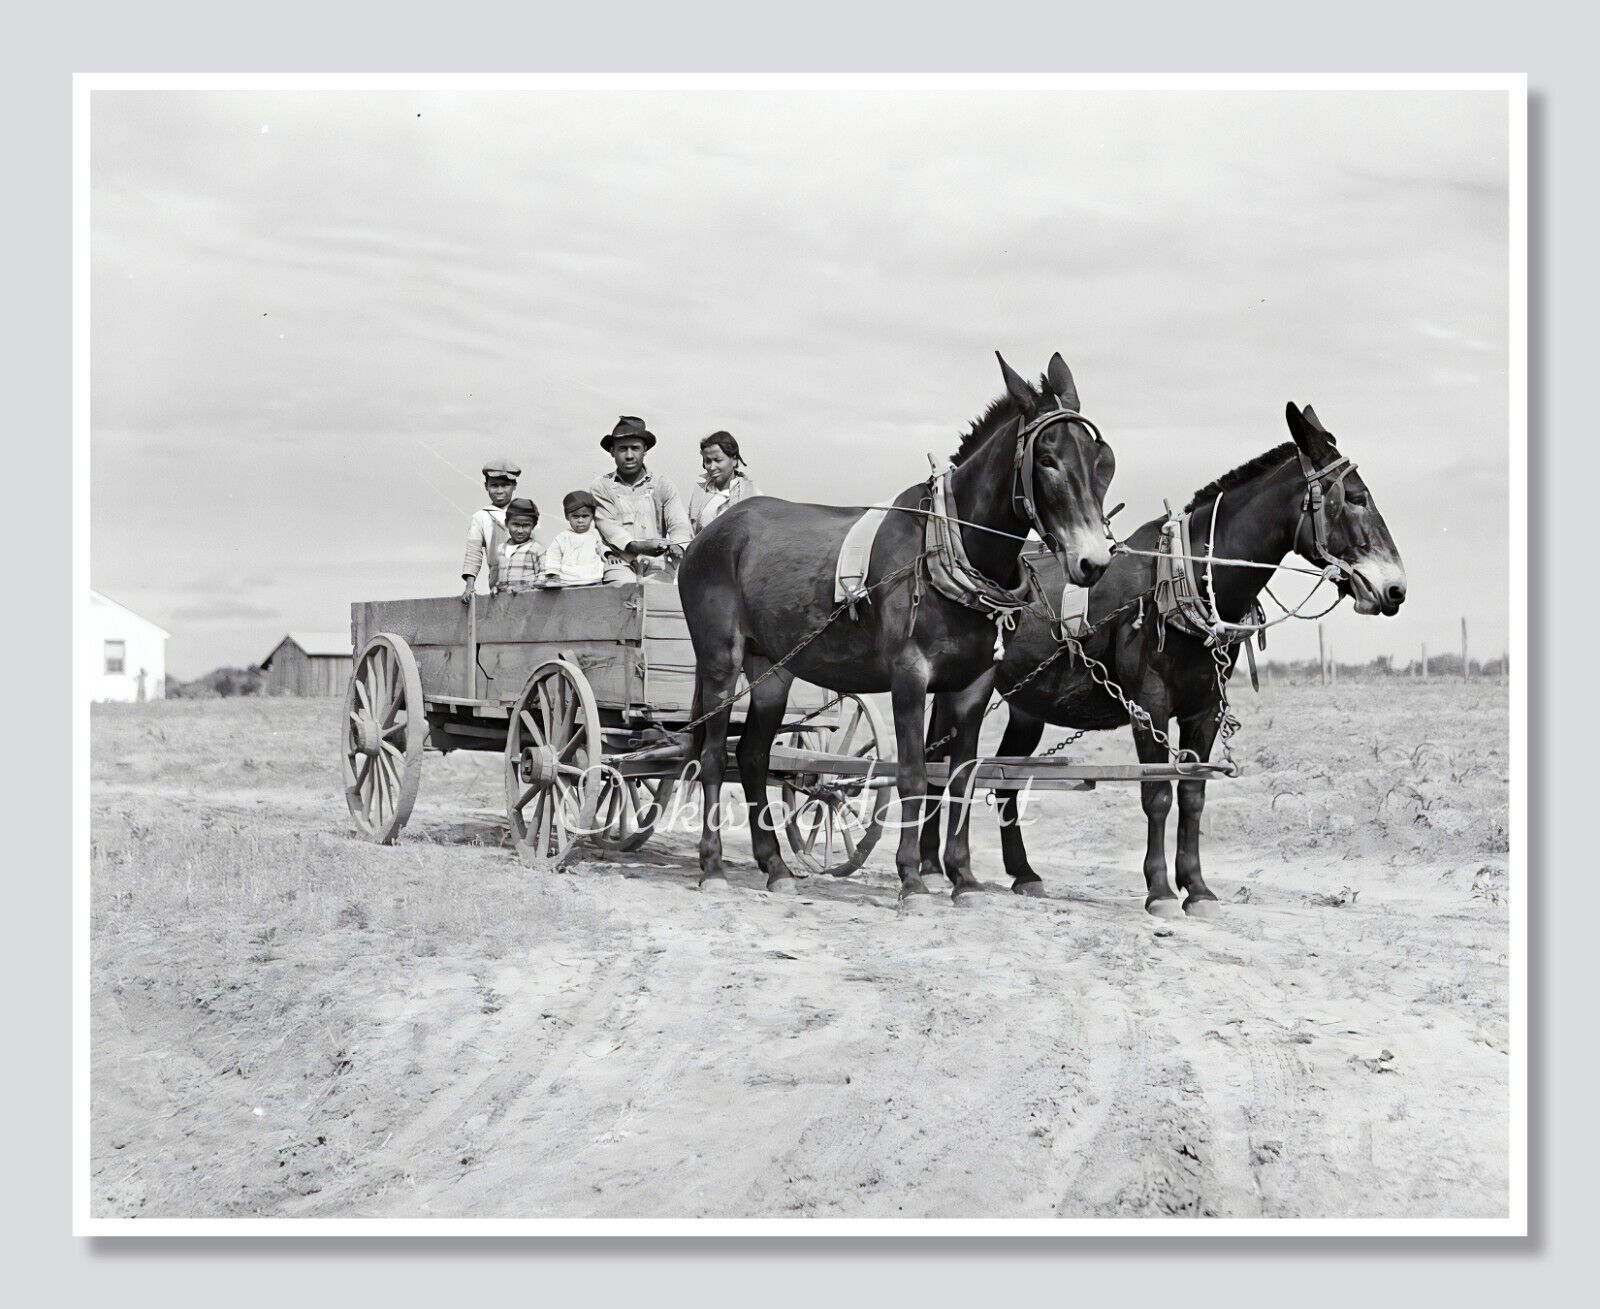 1930s Black Family in Mule-Drawn Wagon, Vintage Photo Reprint